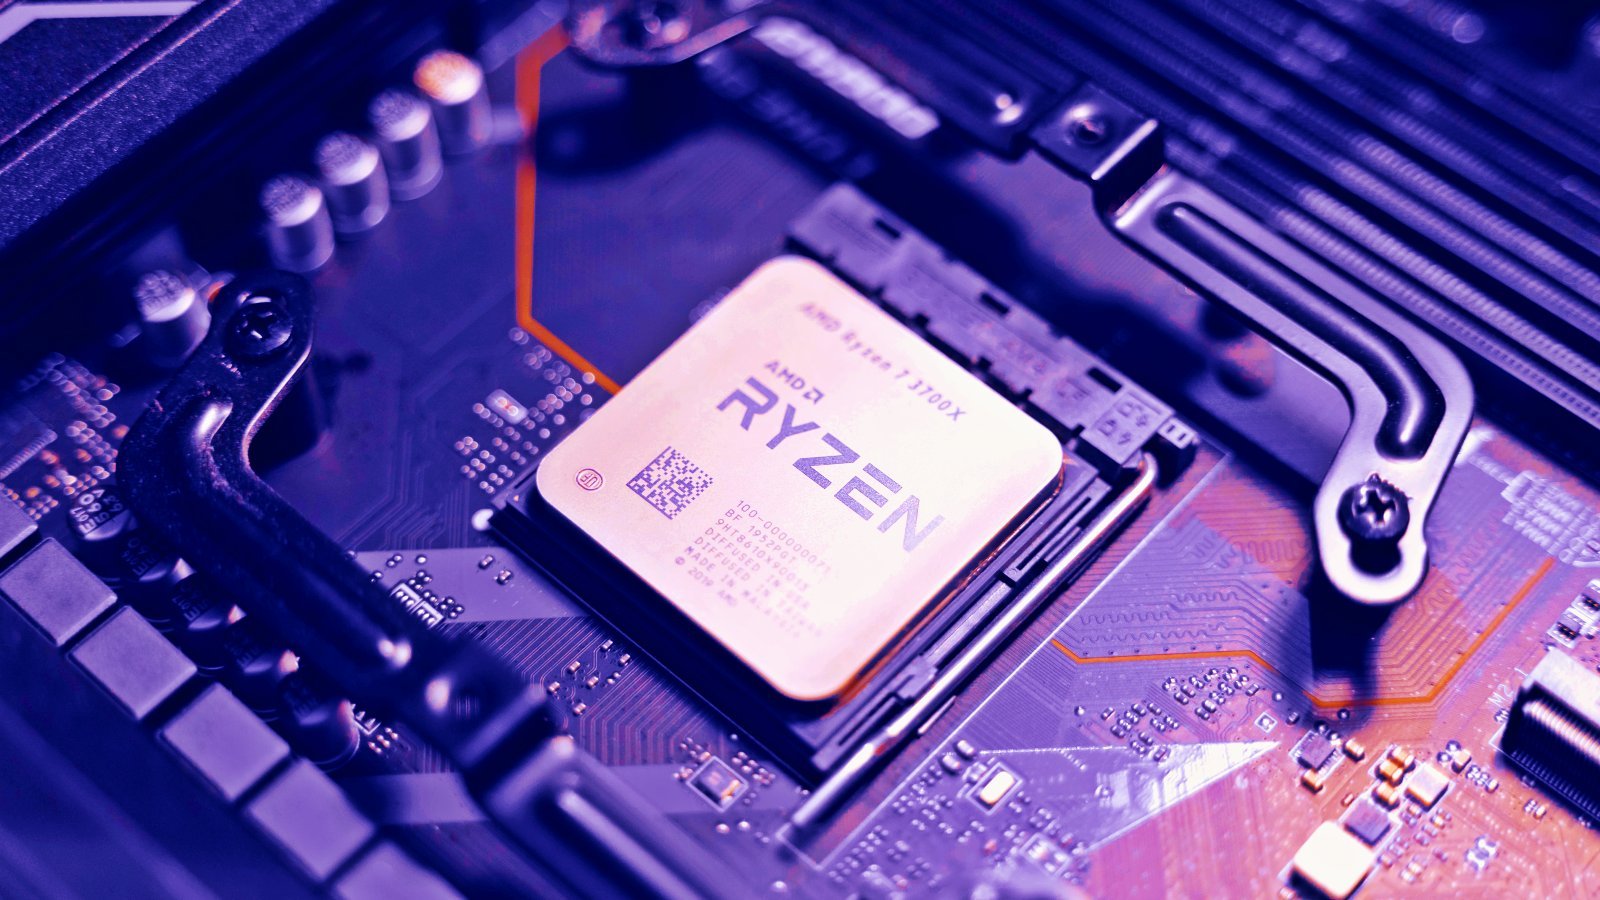 New Inception attack leaks sensitive data from all AMD Zen CPUs – Source: www.bleepingcomputer.com